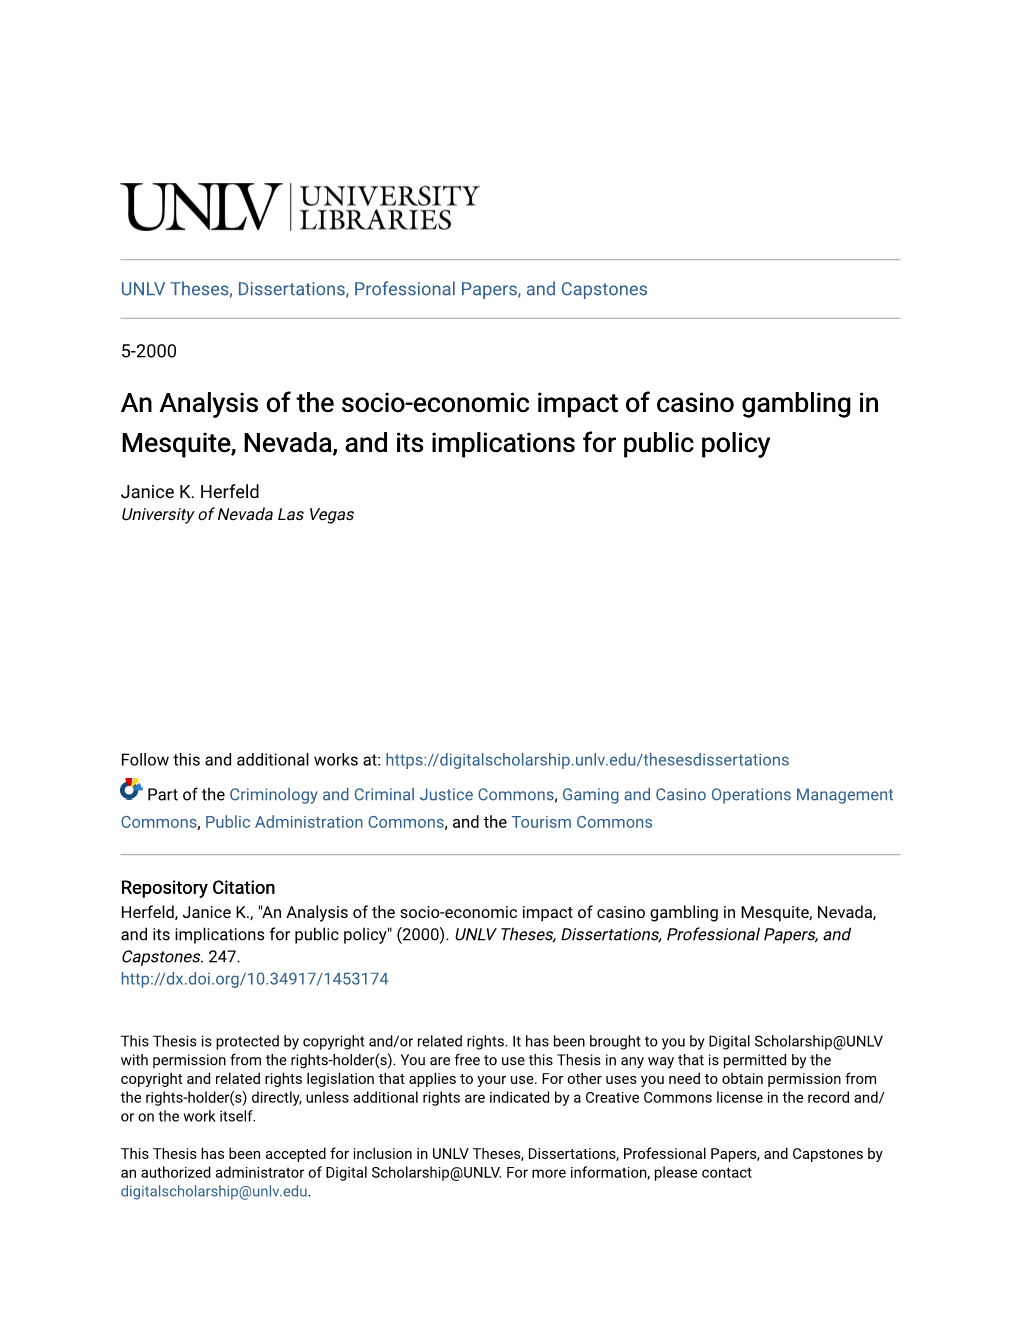 An Analysis of the Socio-Economic Impact of Casino Gambling in Mesquite, Nevada, and Its Implications for Public Policy